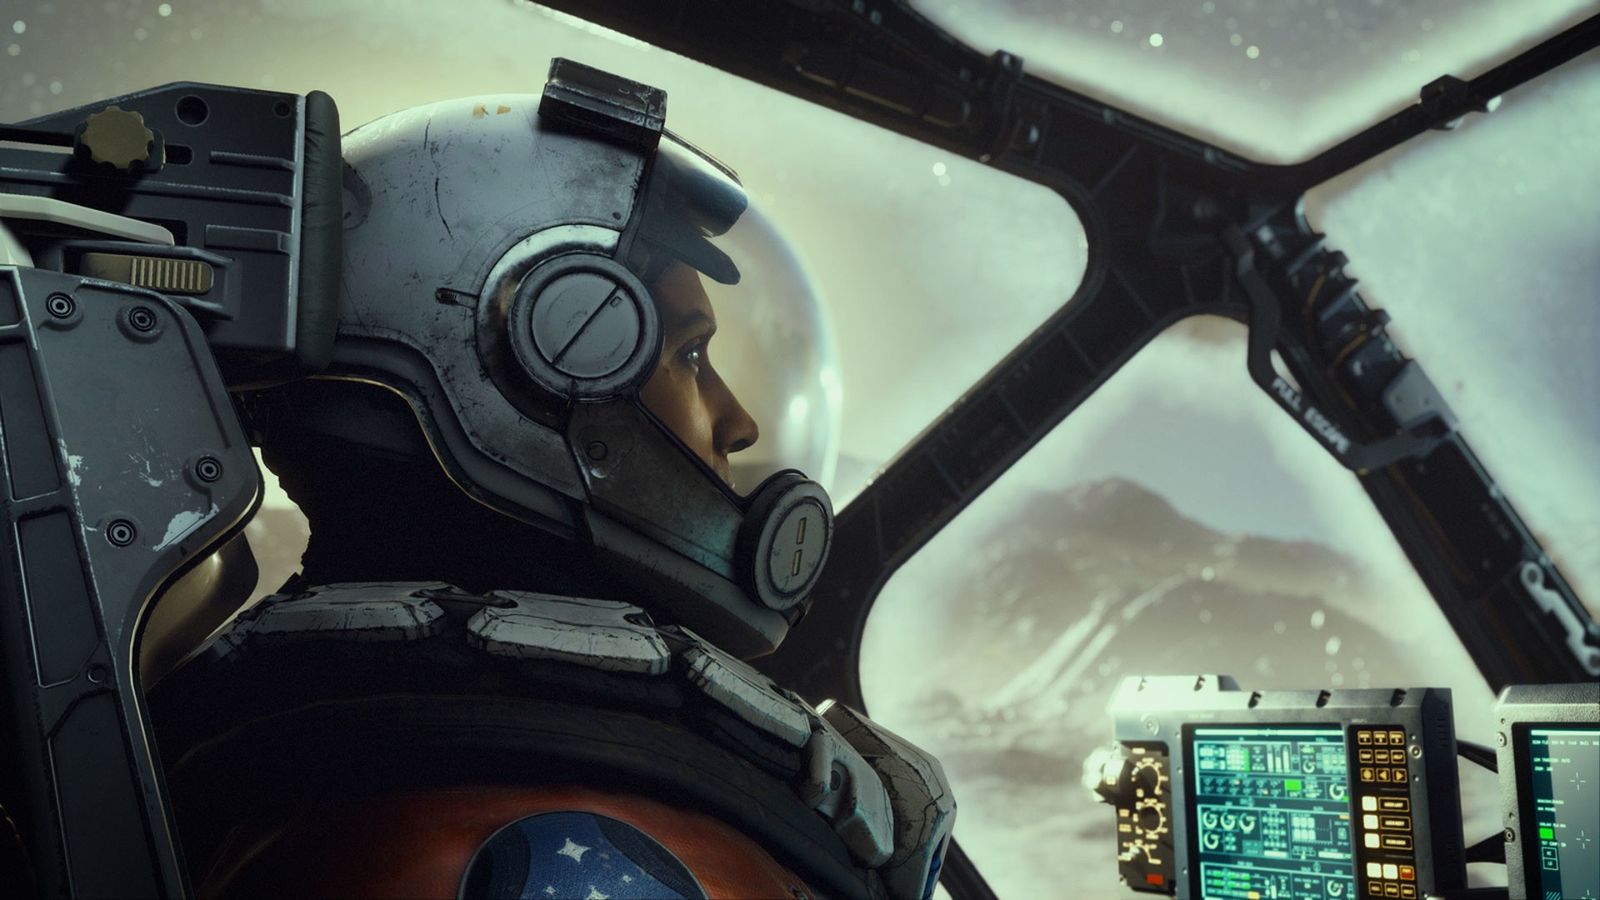 Starfield player wearing space suit while sat in cockpit of spaceship